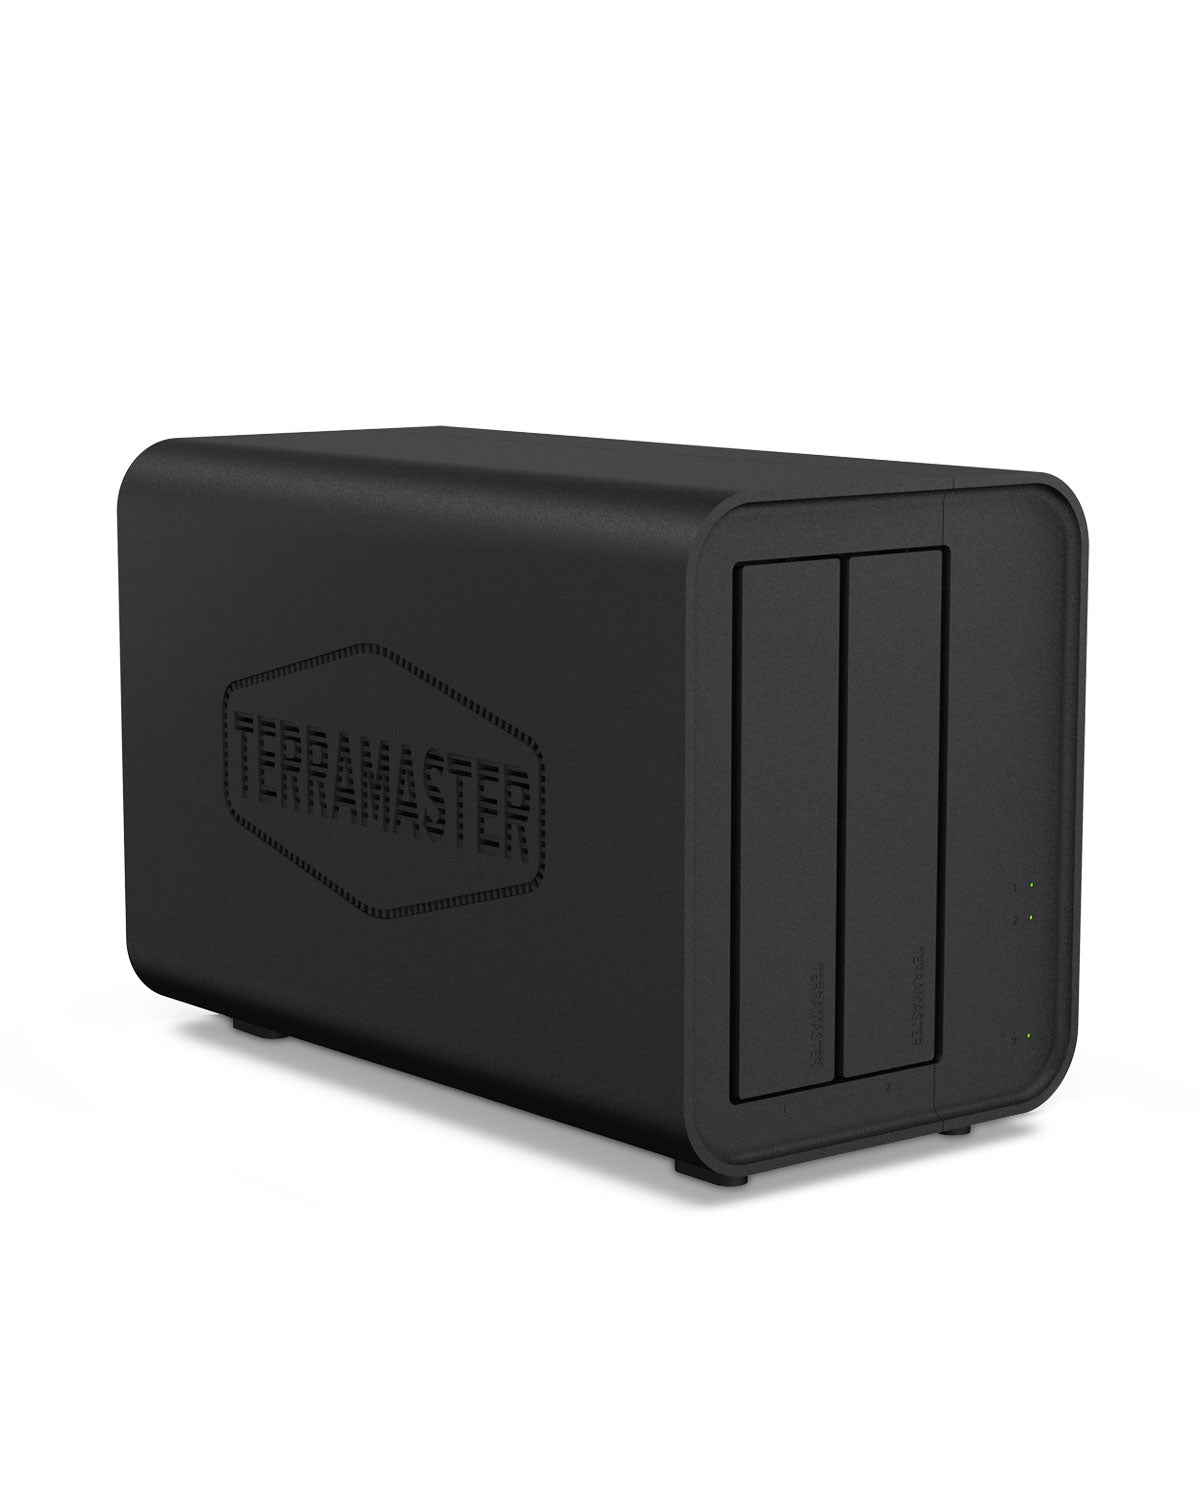 TERRAMASTER F2-212 2 Bay NAS - Quad Core 1GB RAM DDR4 Personal Private Cloud Network Attached Storage (Diskless)